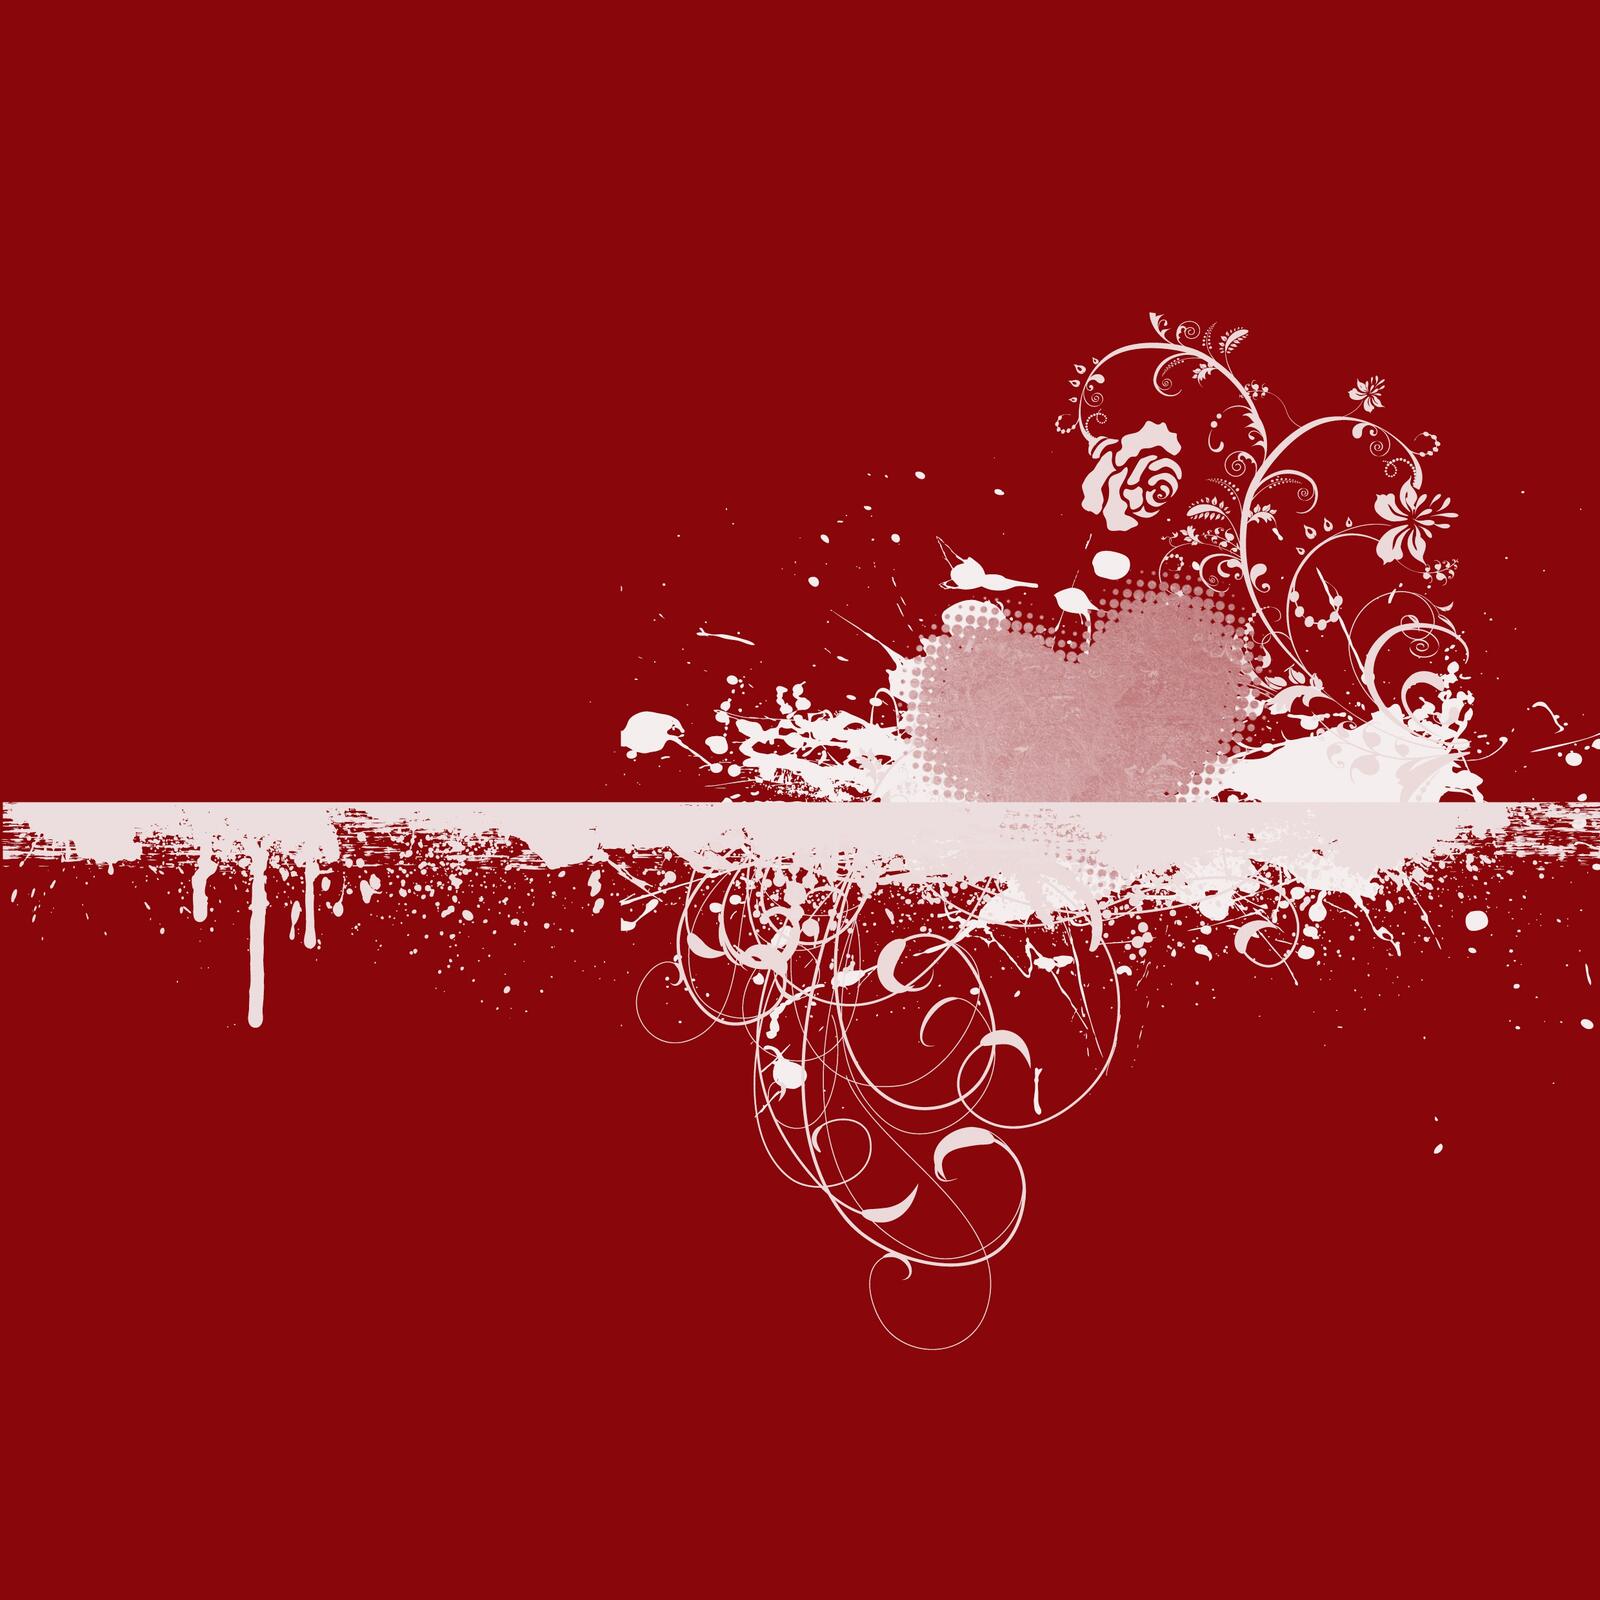 Wallpapers Valentine day love heart on the desktop